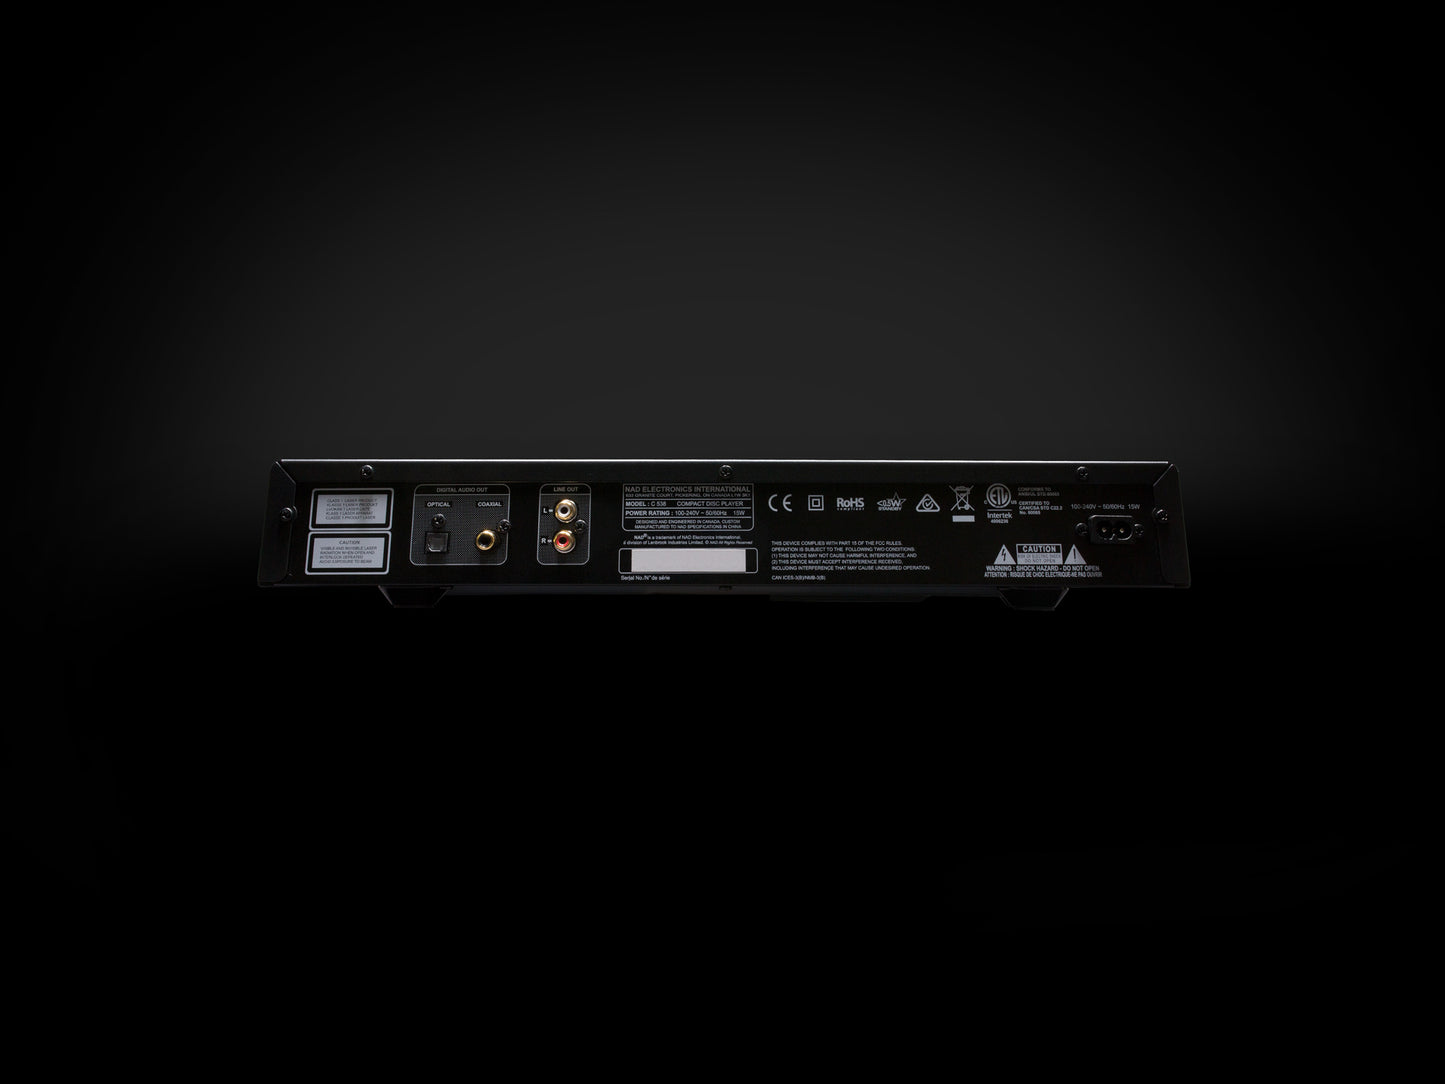 NAD C 538 Compact Disc Player